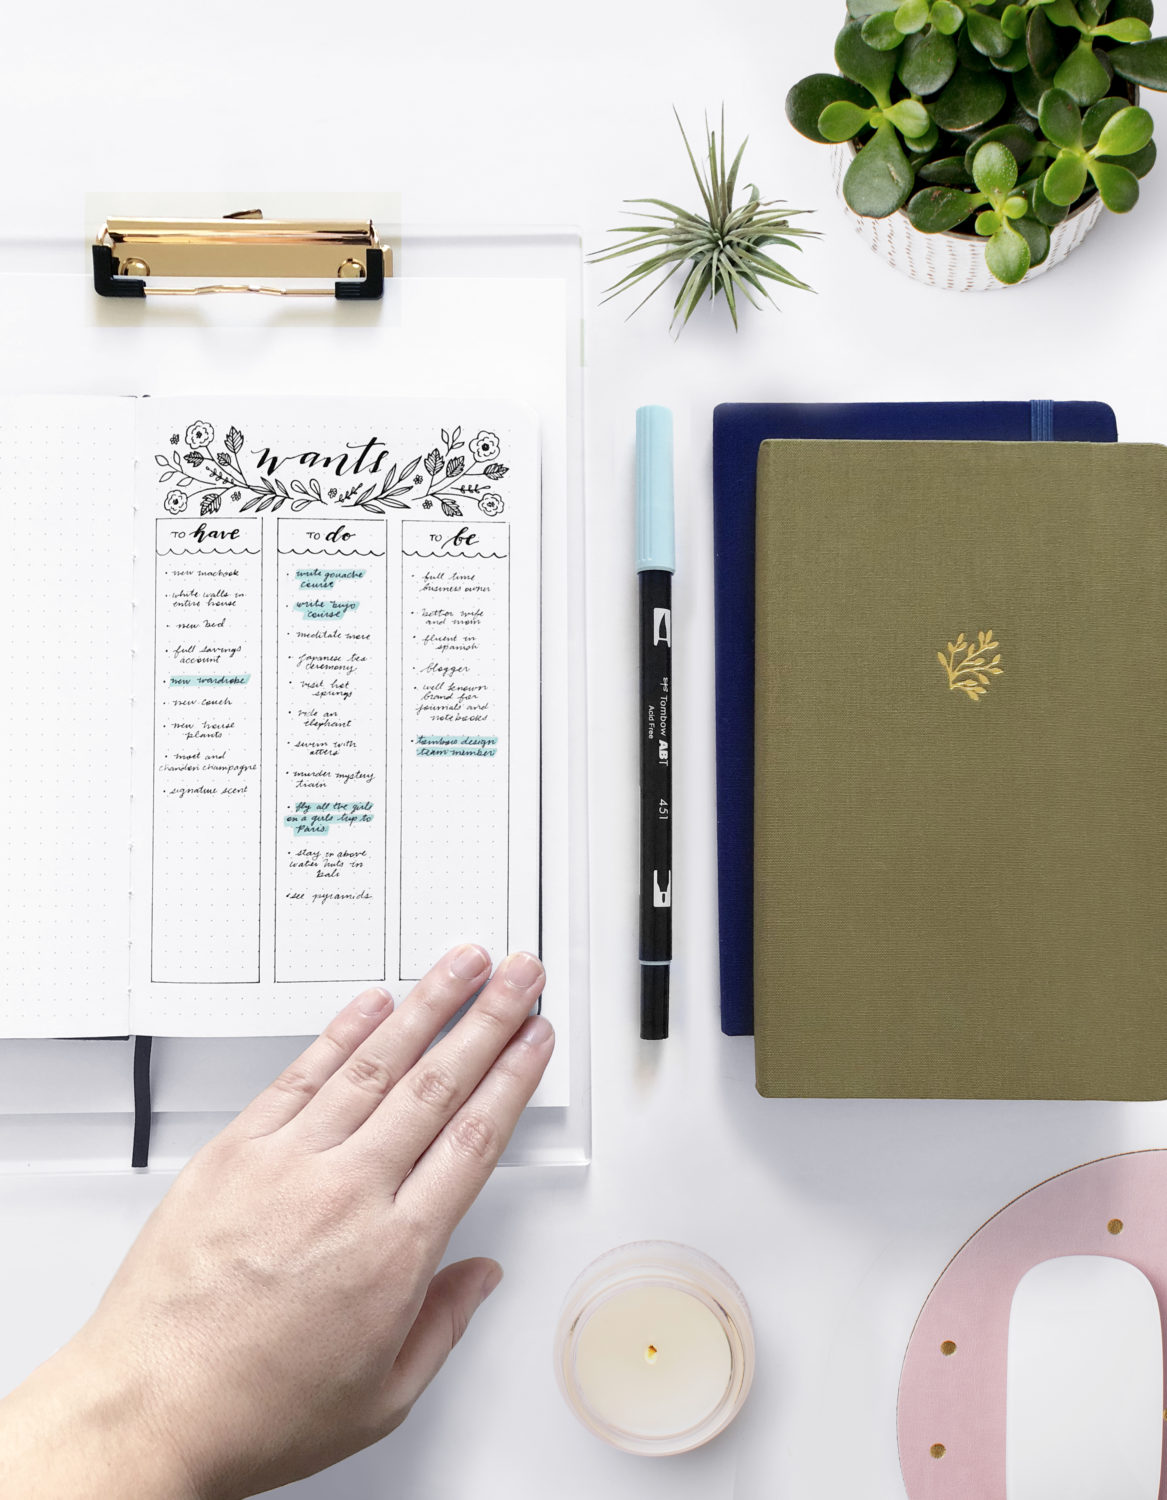 The new way to plan - dot grid journaling